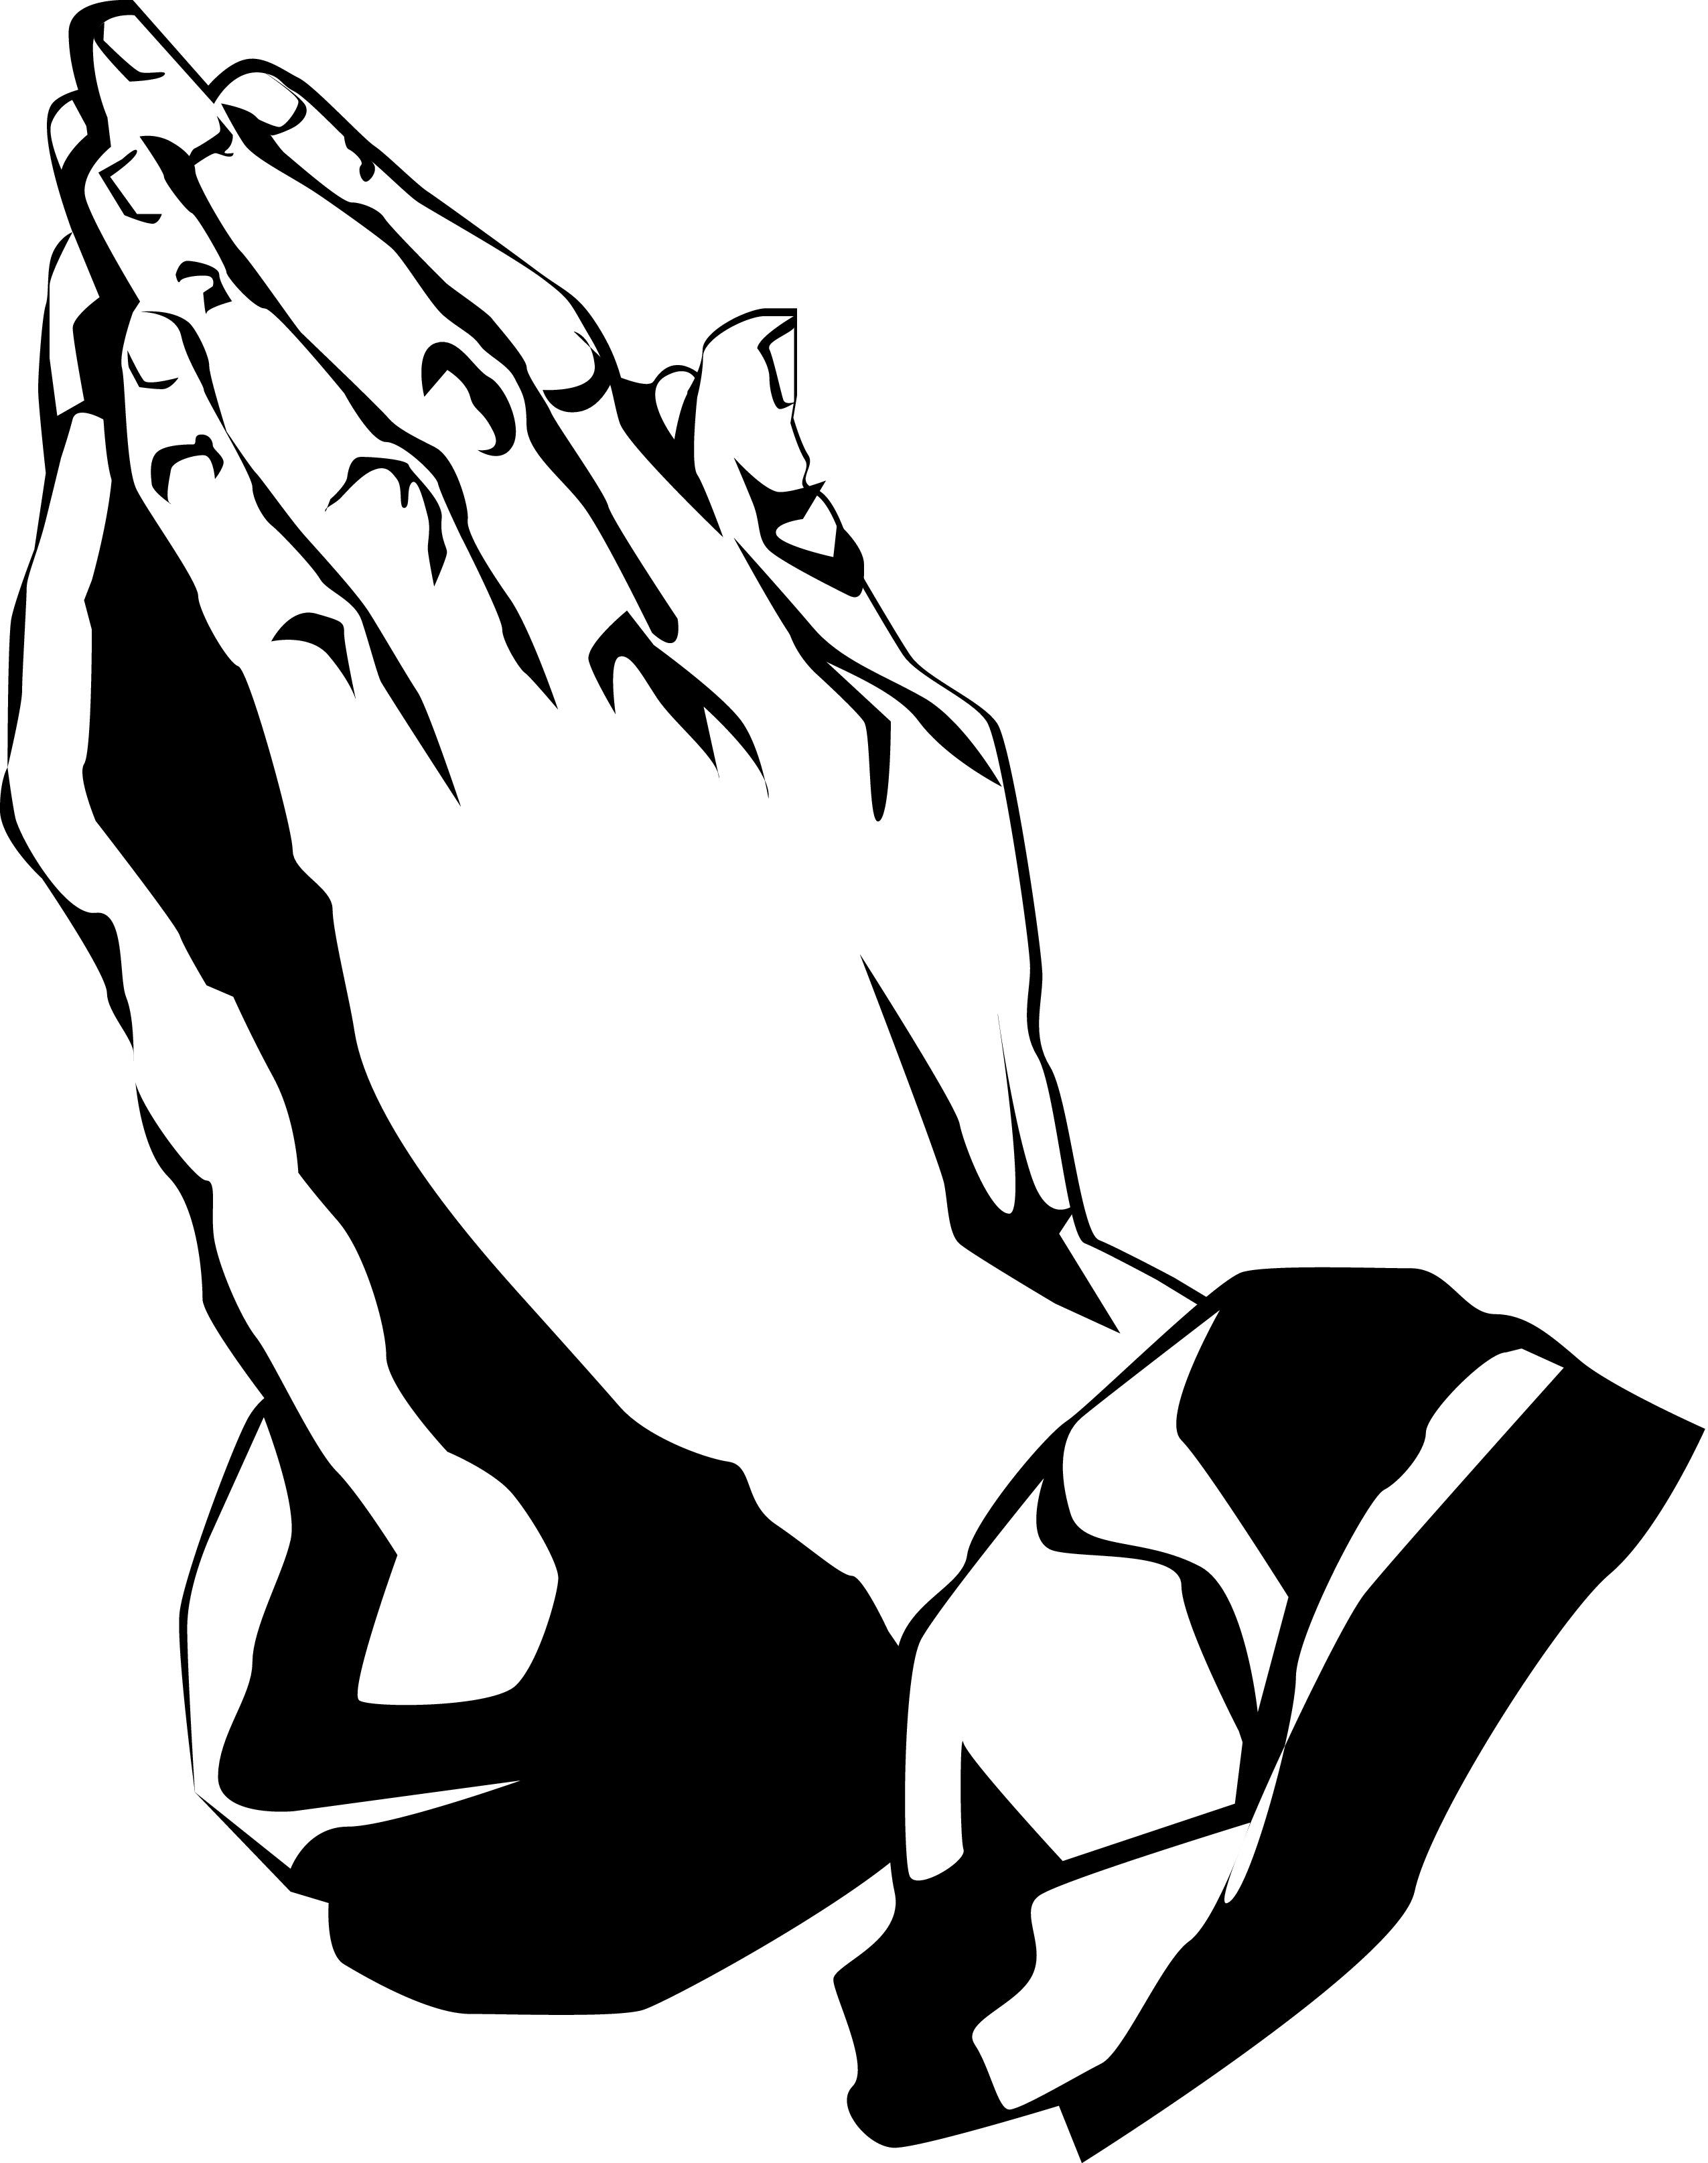 Images For > Prayer Hands Clipart